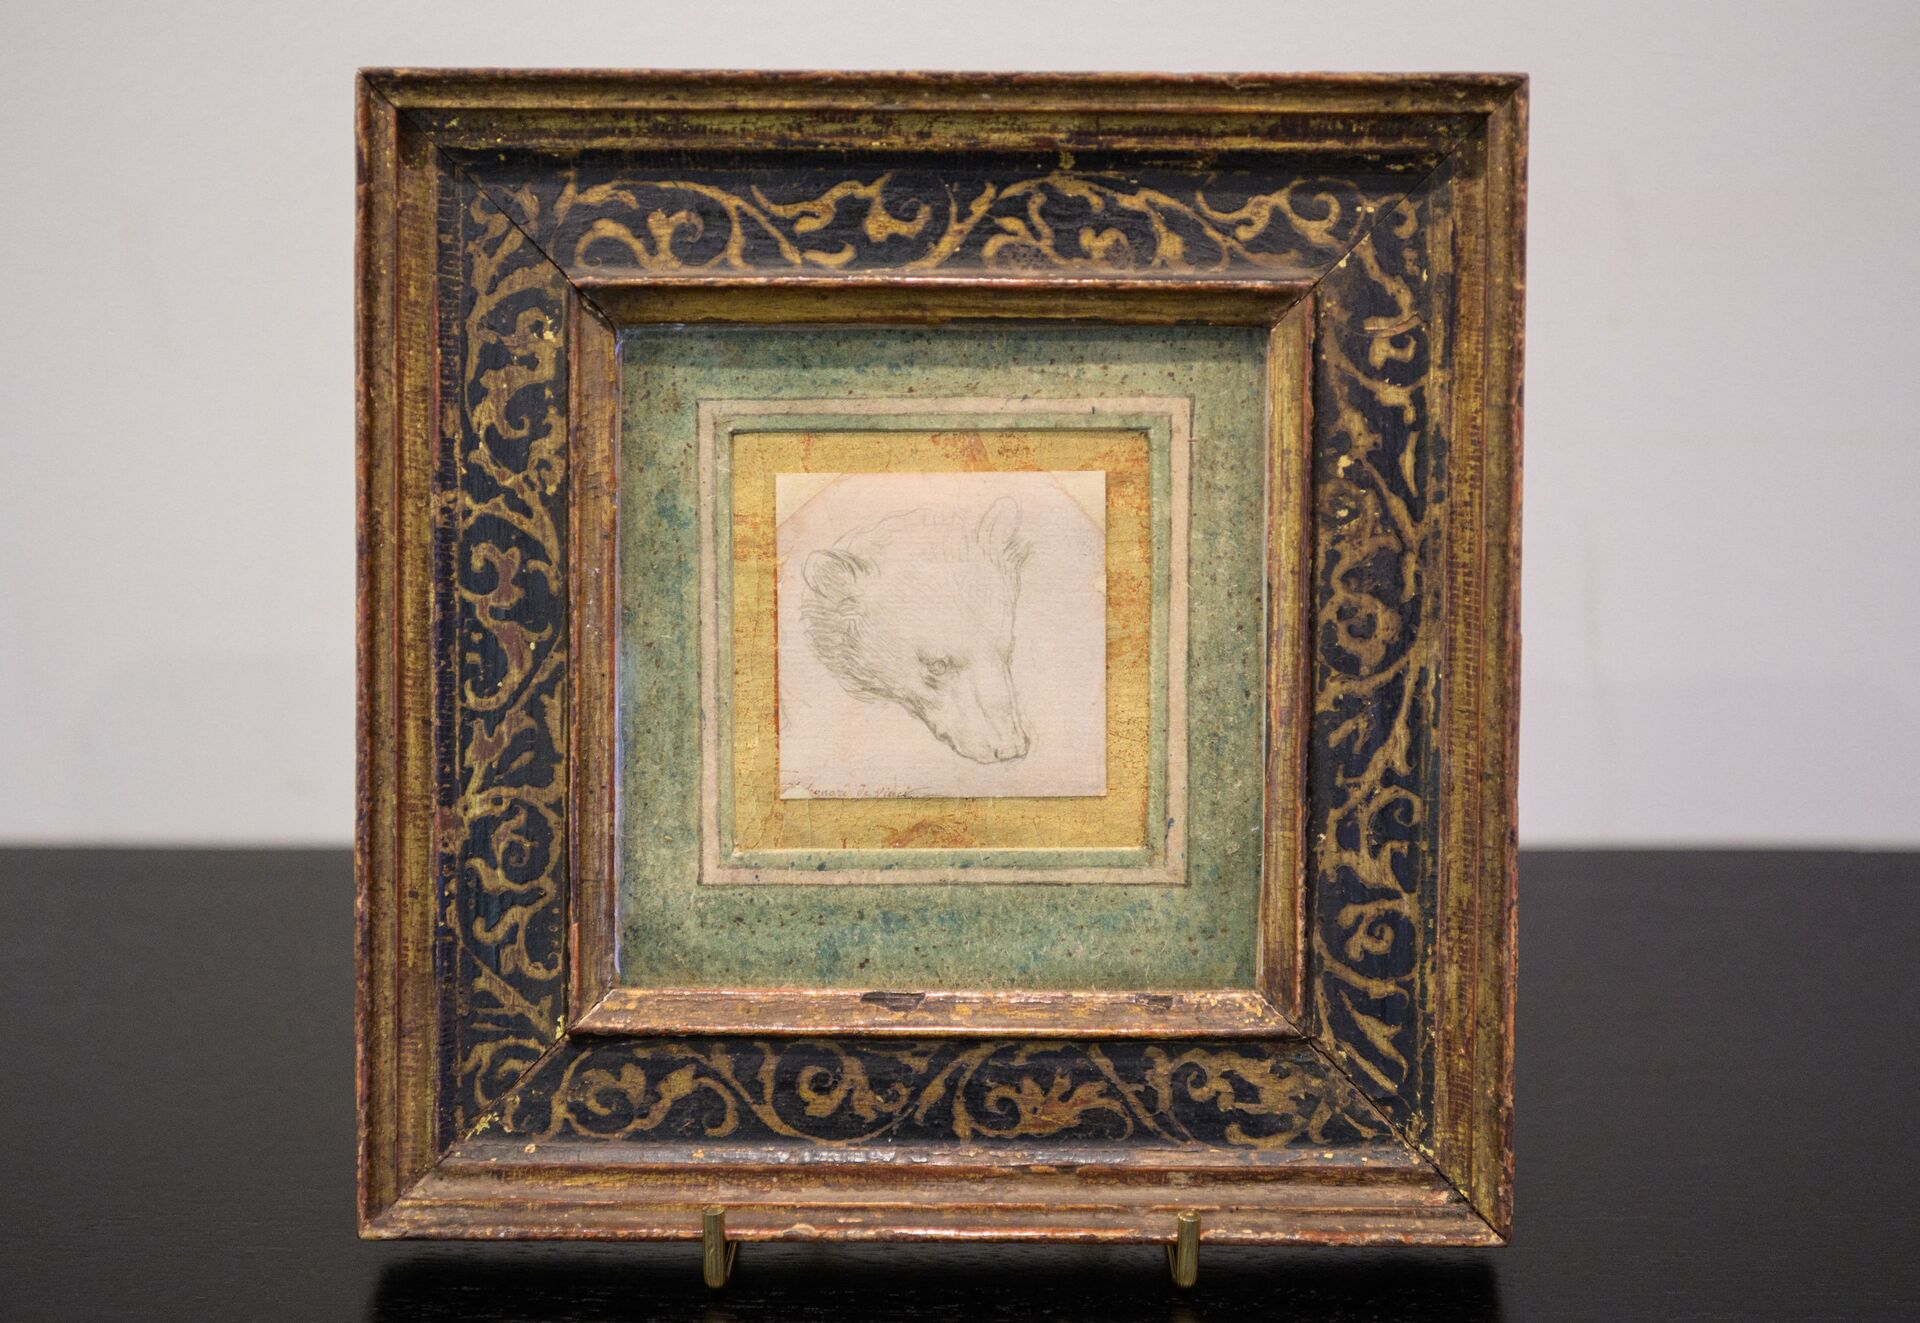 Leonardo da Vinci's rare drawing of a bear, measuring 2 ѕ x 2 ѕ inches (7 x 7 cm), estimated at Ј8,000,000-12,000,000 (over $16 million) is on display ahead of its sale at Christie’s London in July on May 10, 202 in New York City. - Sputnik International, 1920, 07.09.2021